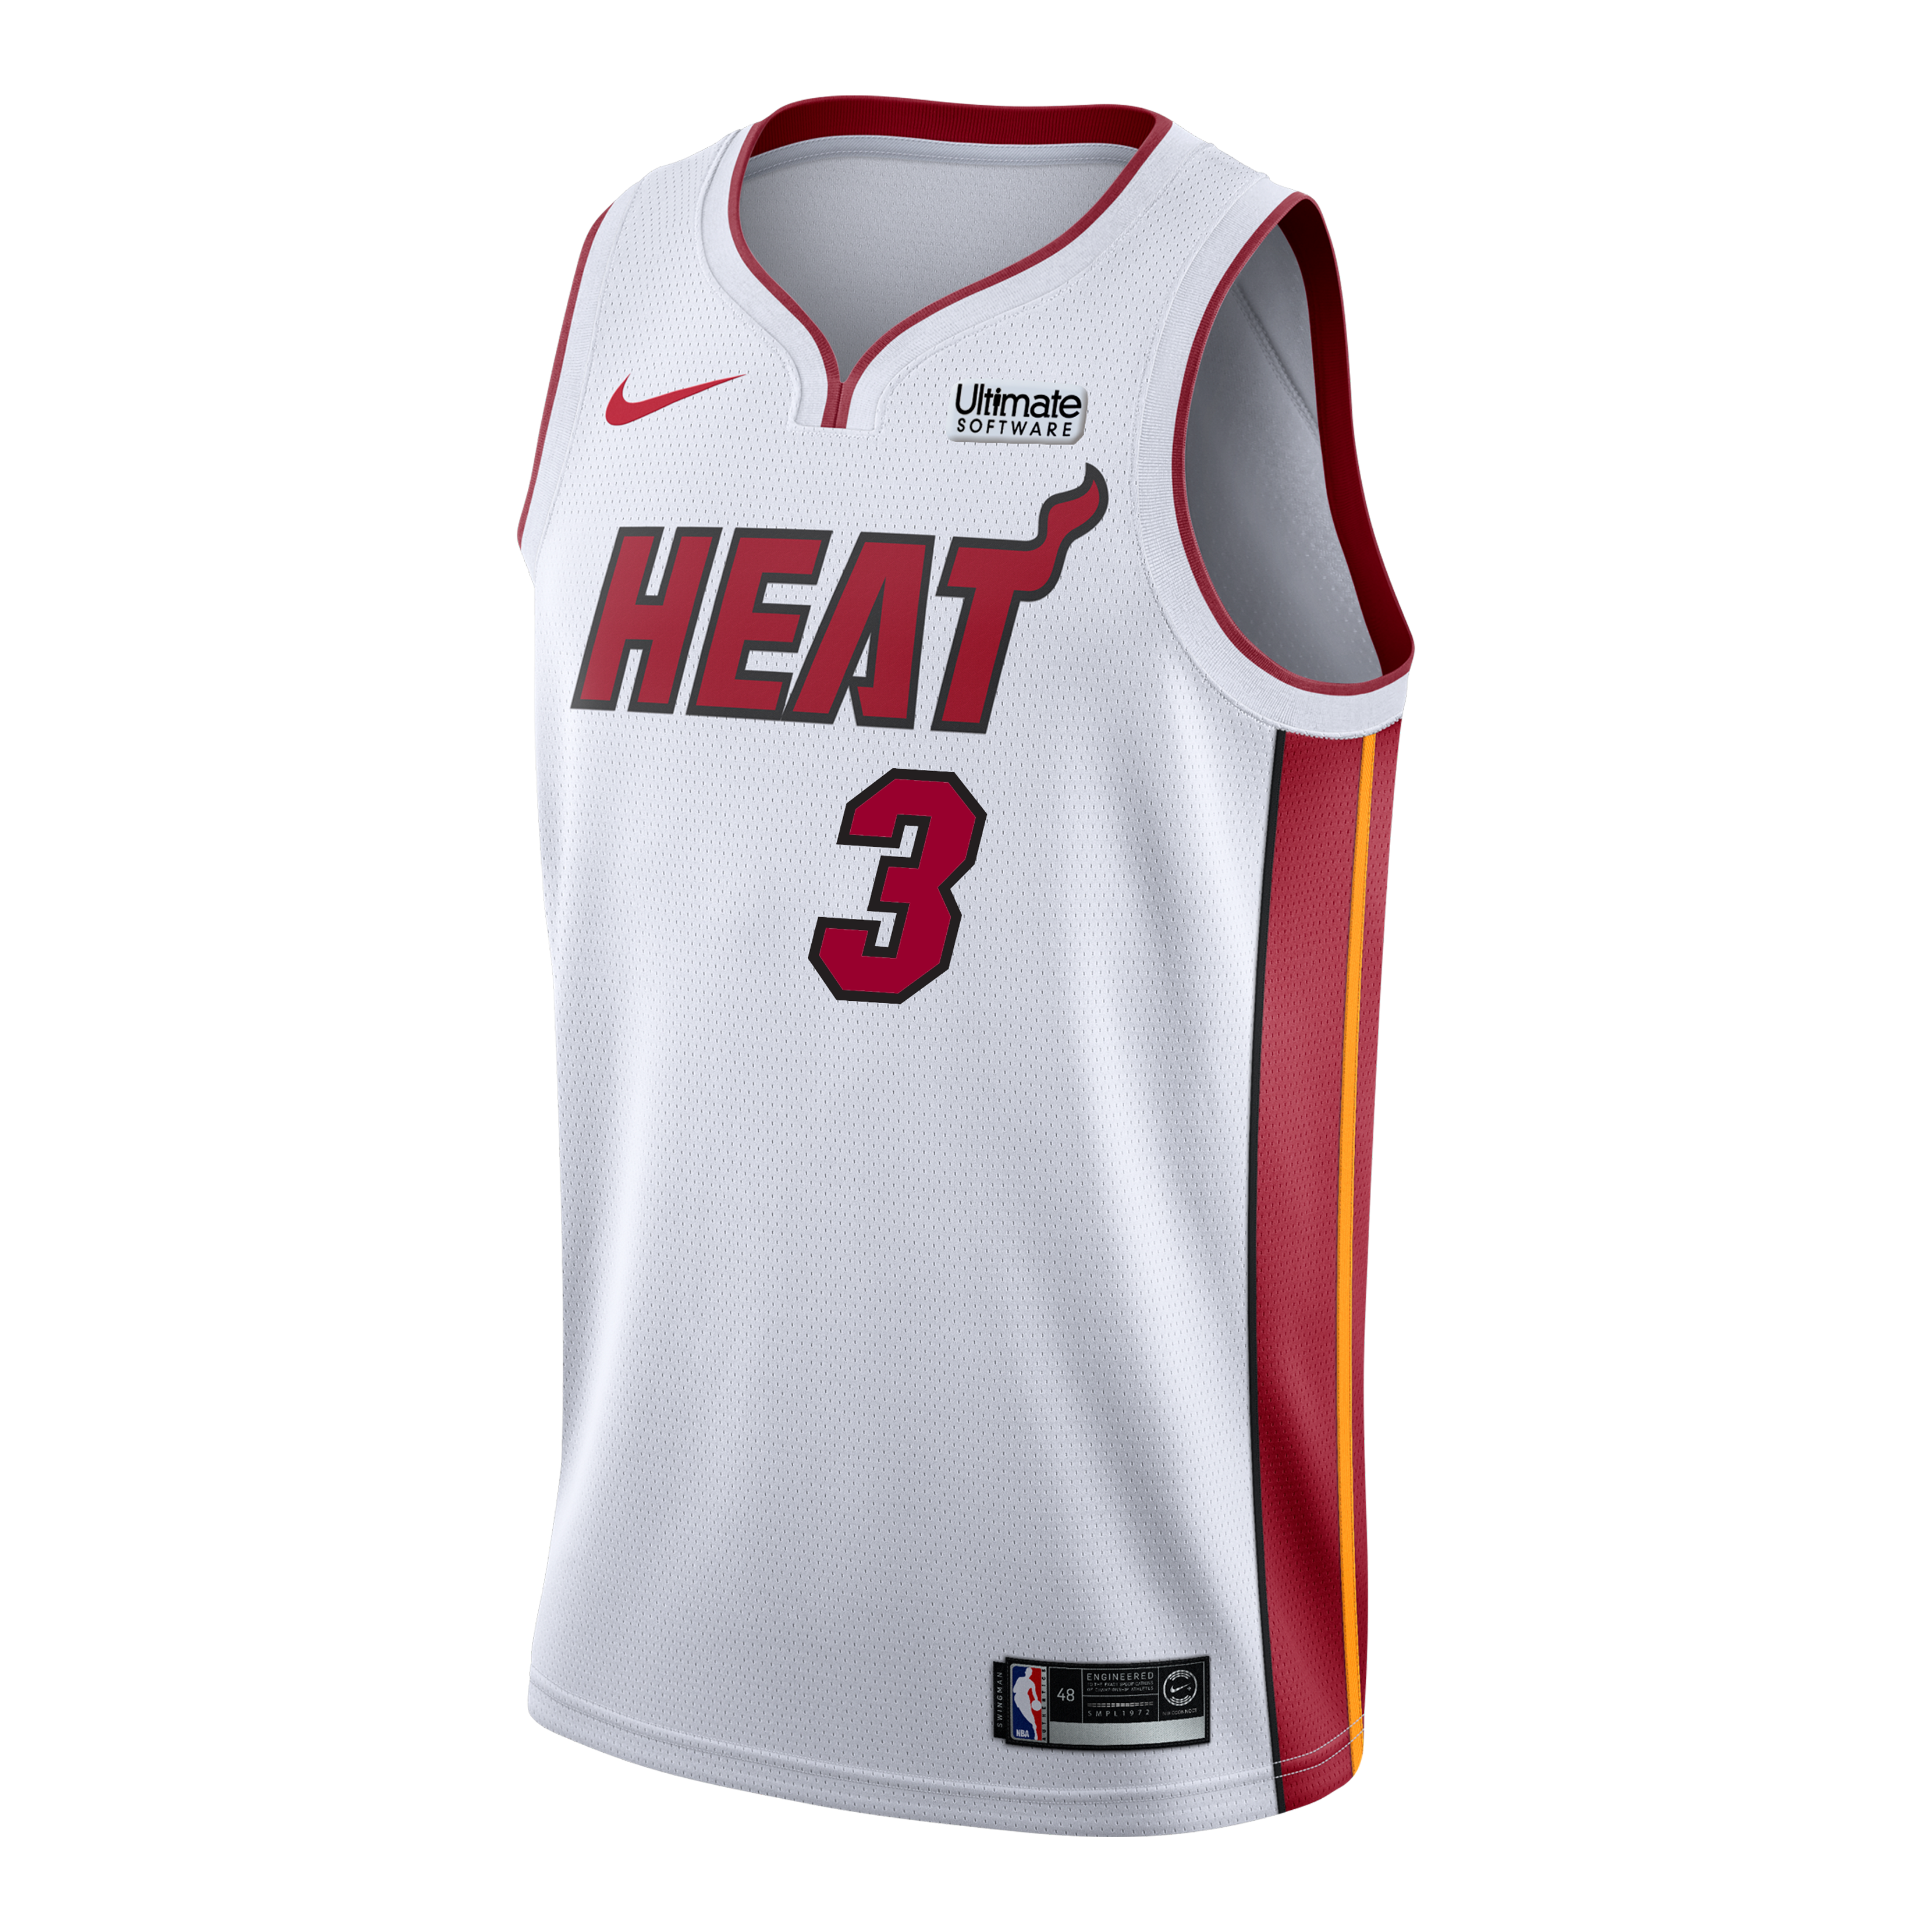 Toddler Miami Heat Dwyane Wade Jersey Size 4t for Sale in